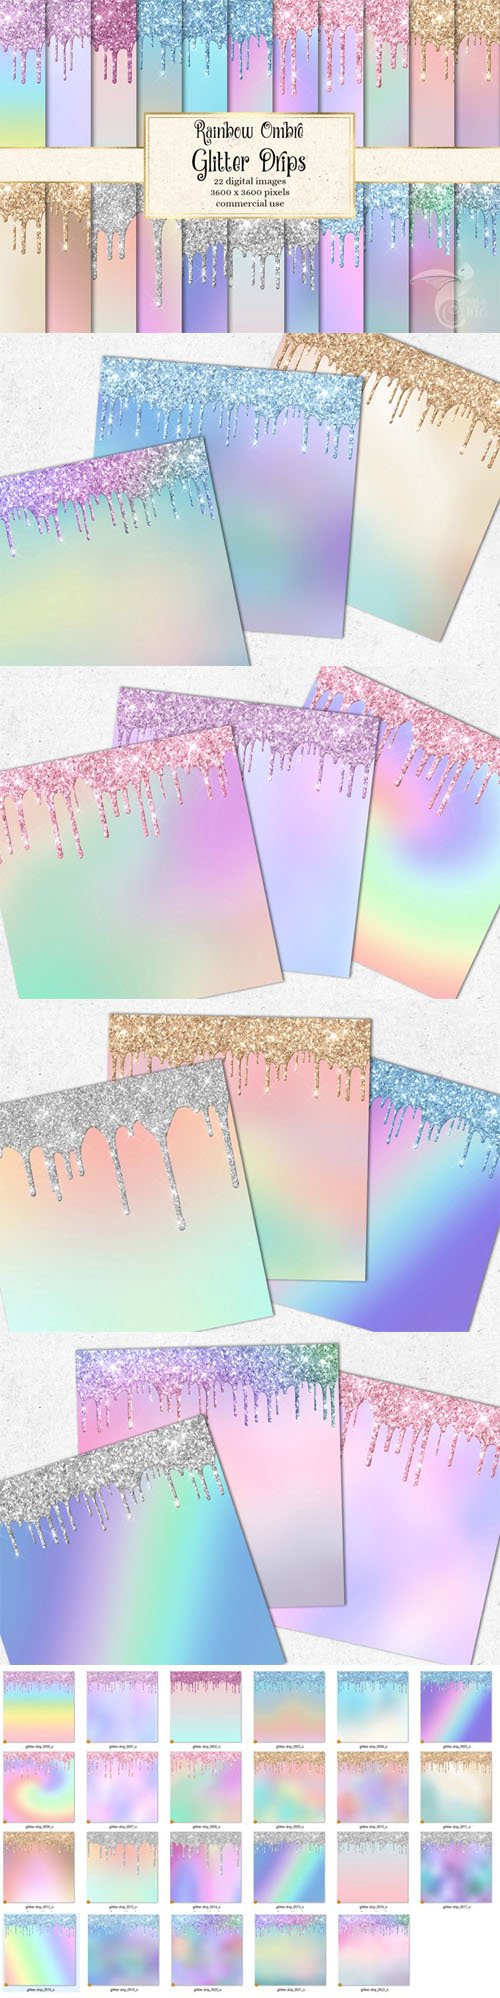 Rainbow Glitter Drips Digital Paper Collection